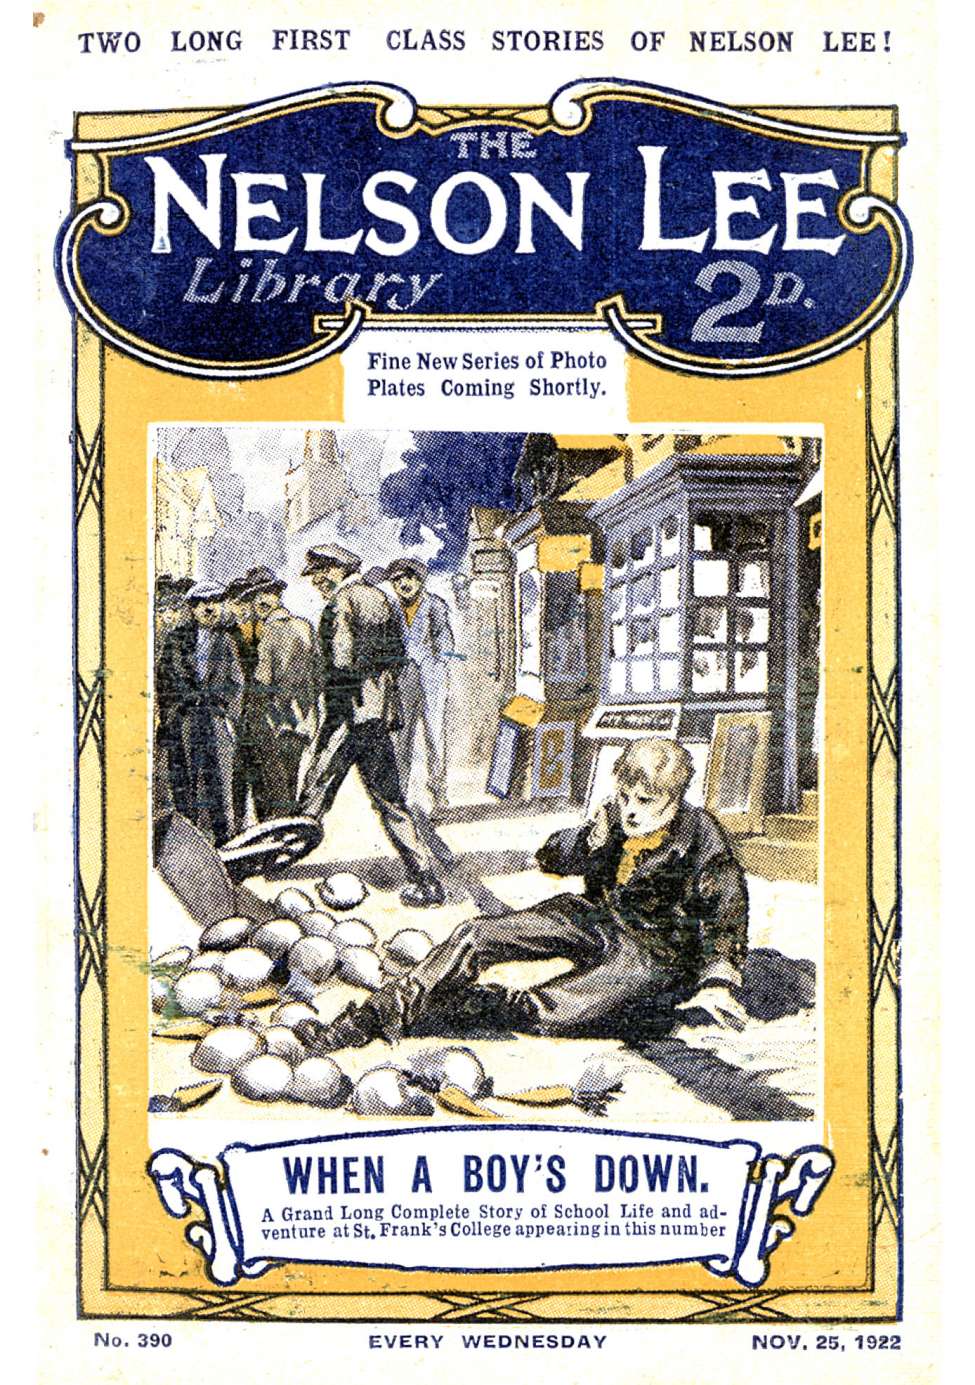 Book Cover For Nelson Lee Library s1 390 - When a Boy's Down